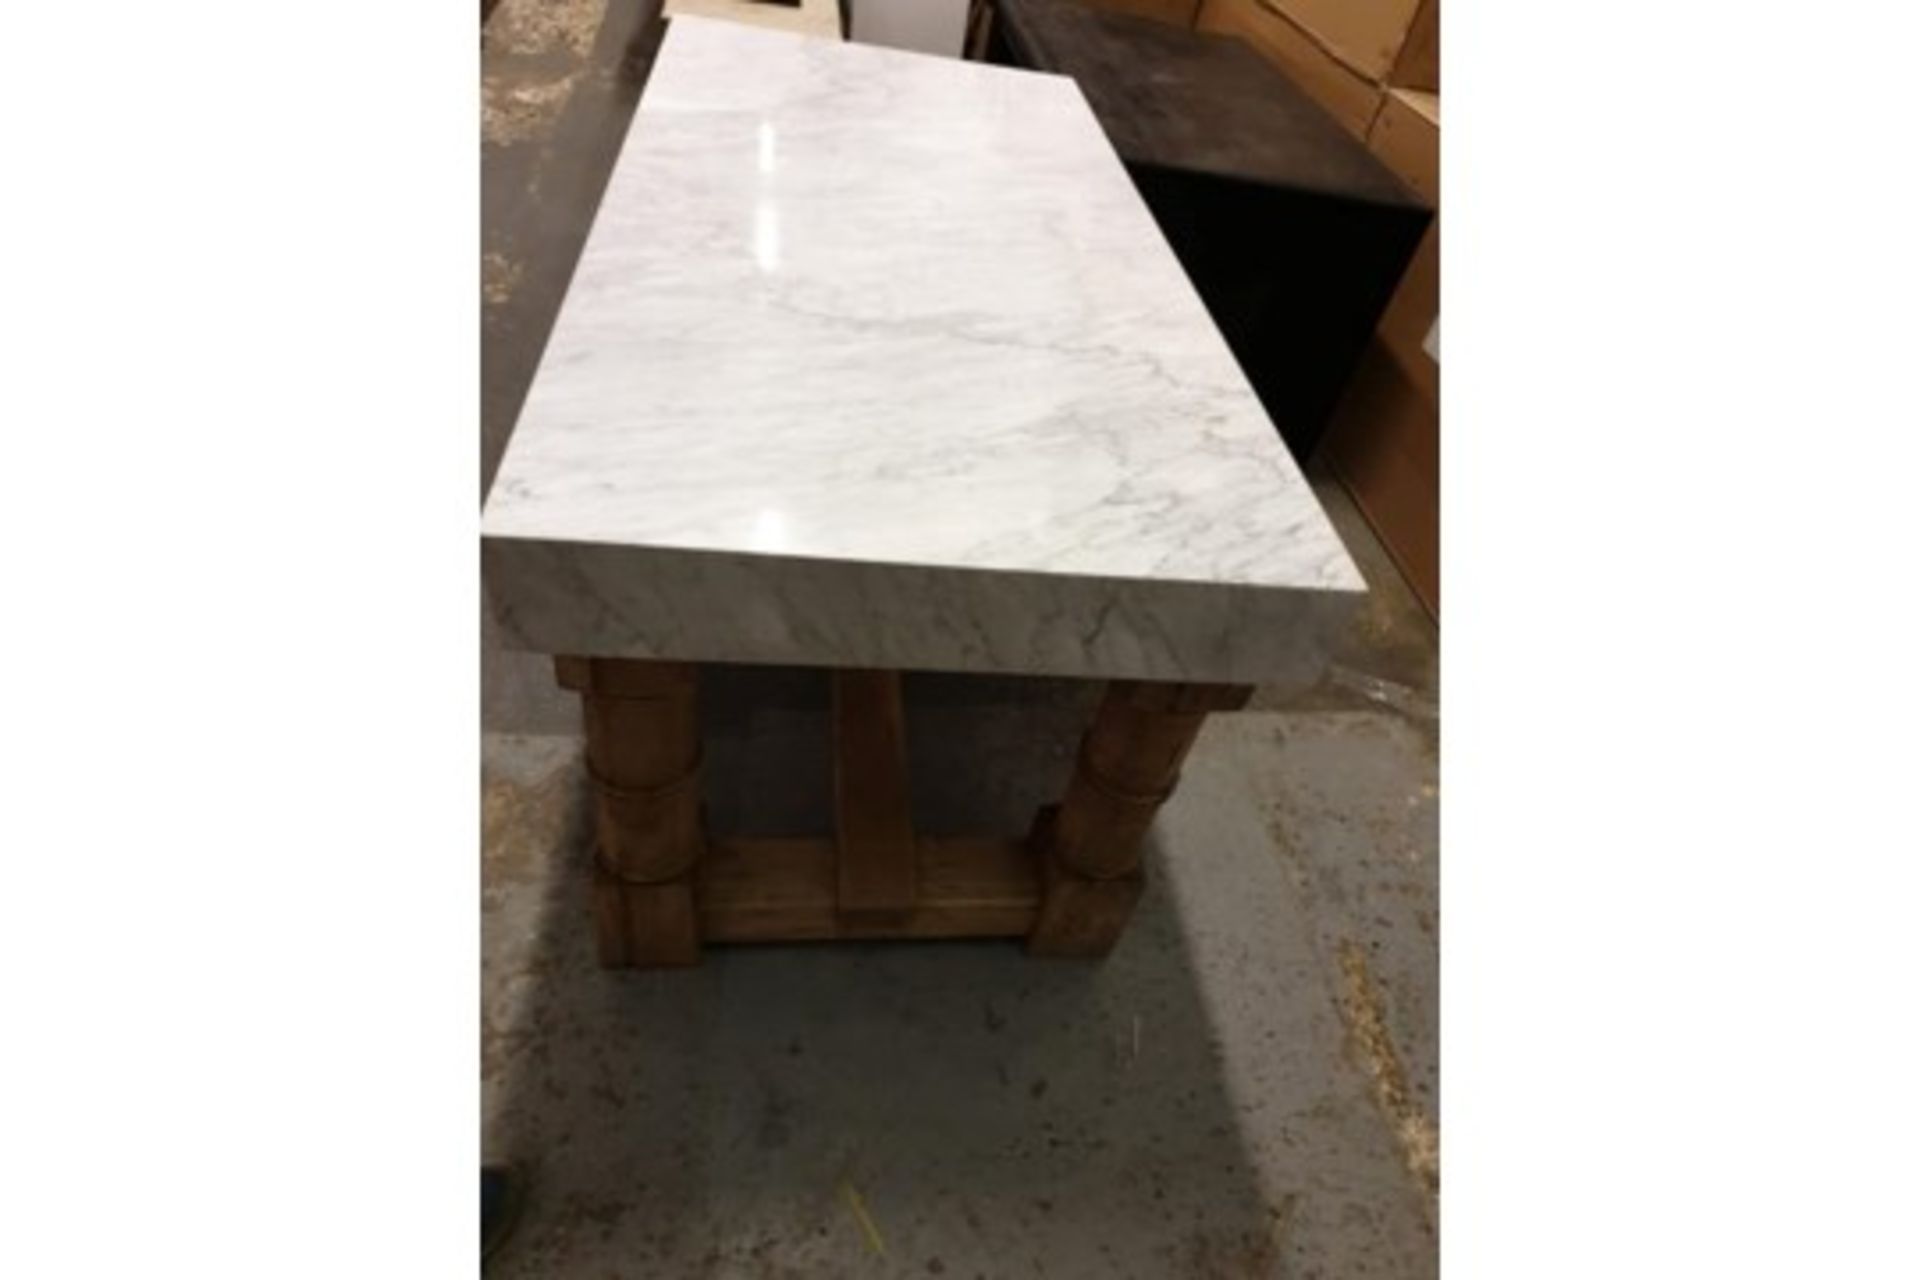 Kitchen Gun Barrel Dining The Gun Barrel Marble Dining Table Is Handcrafted From Genuine English - Image 2 of 2